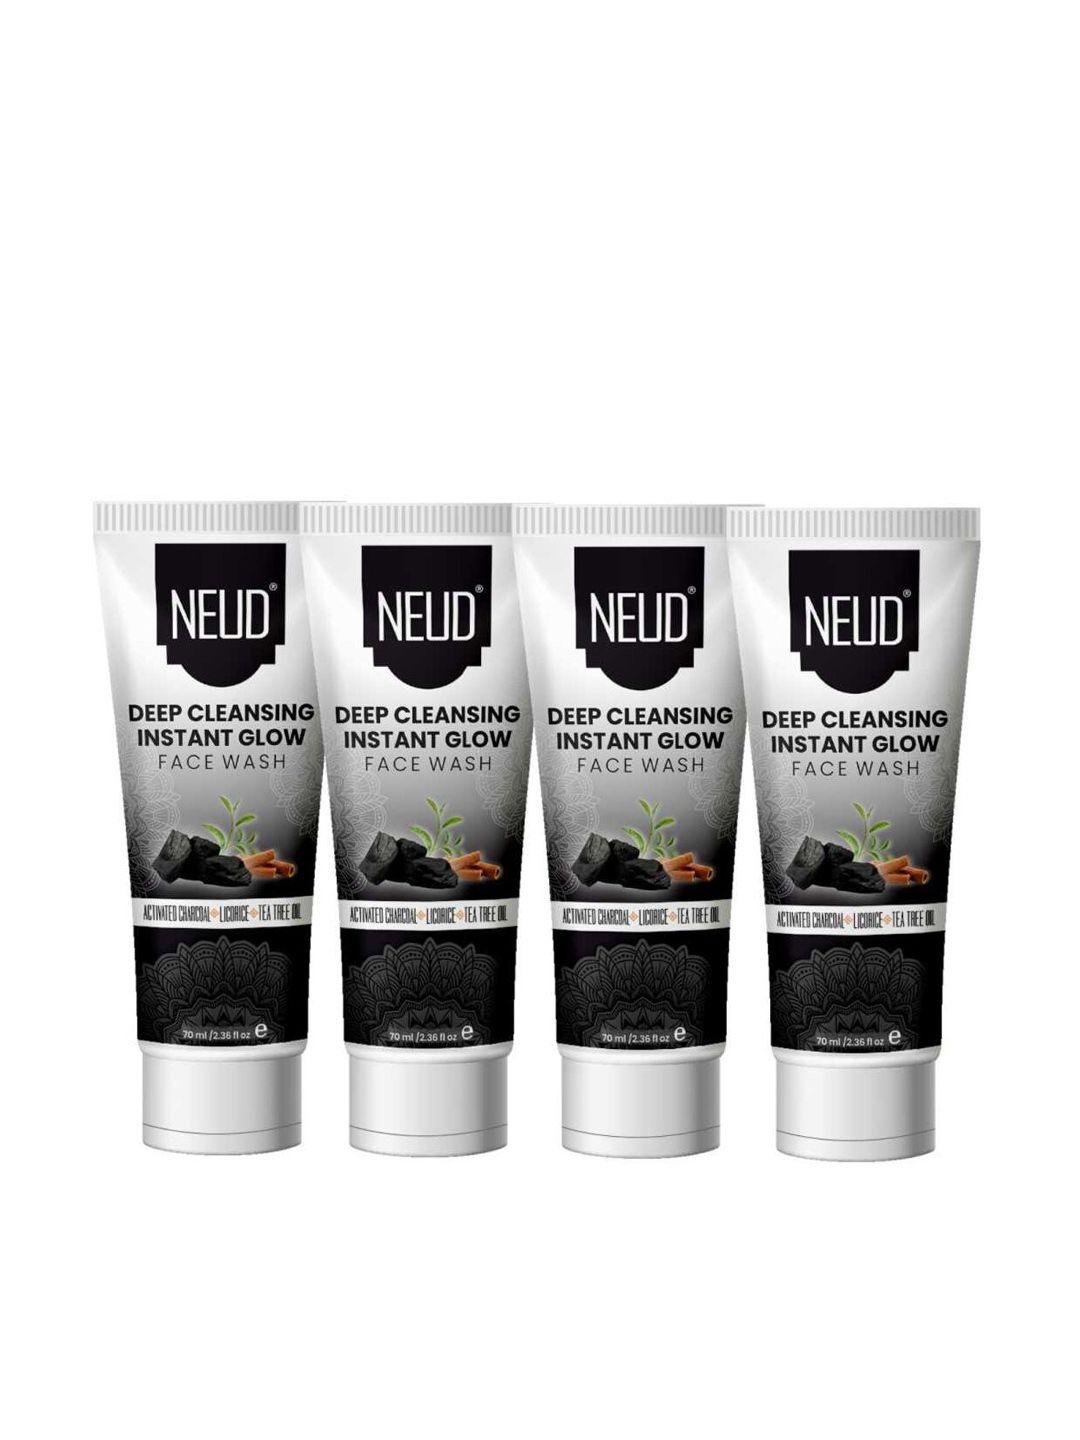 neud deep cleansing instant glow set of 4 face wash 70 ml each